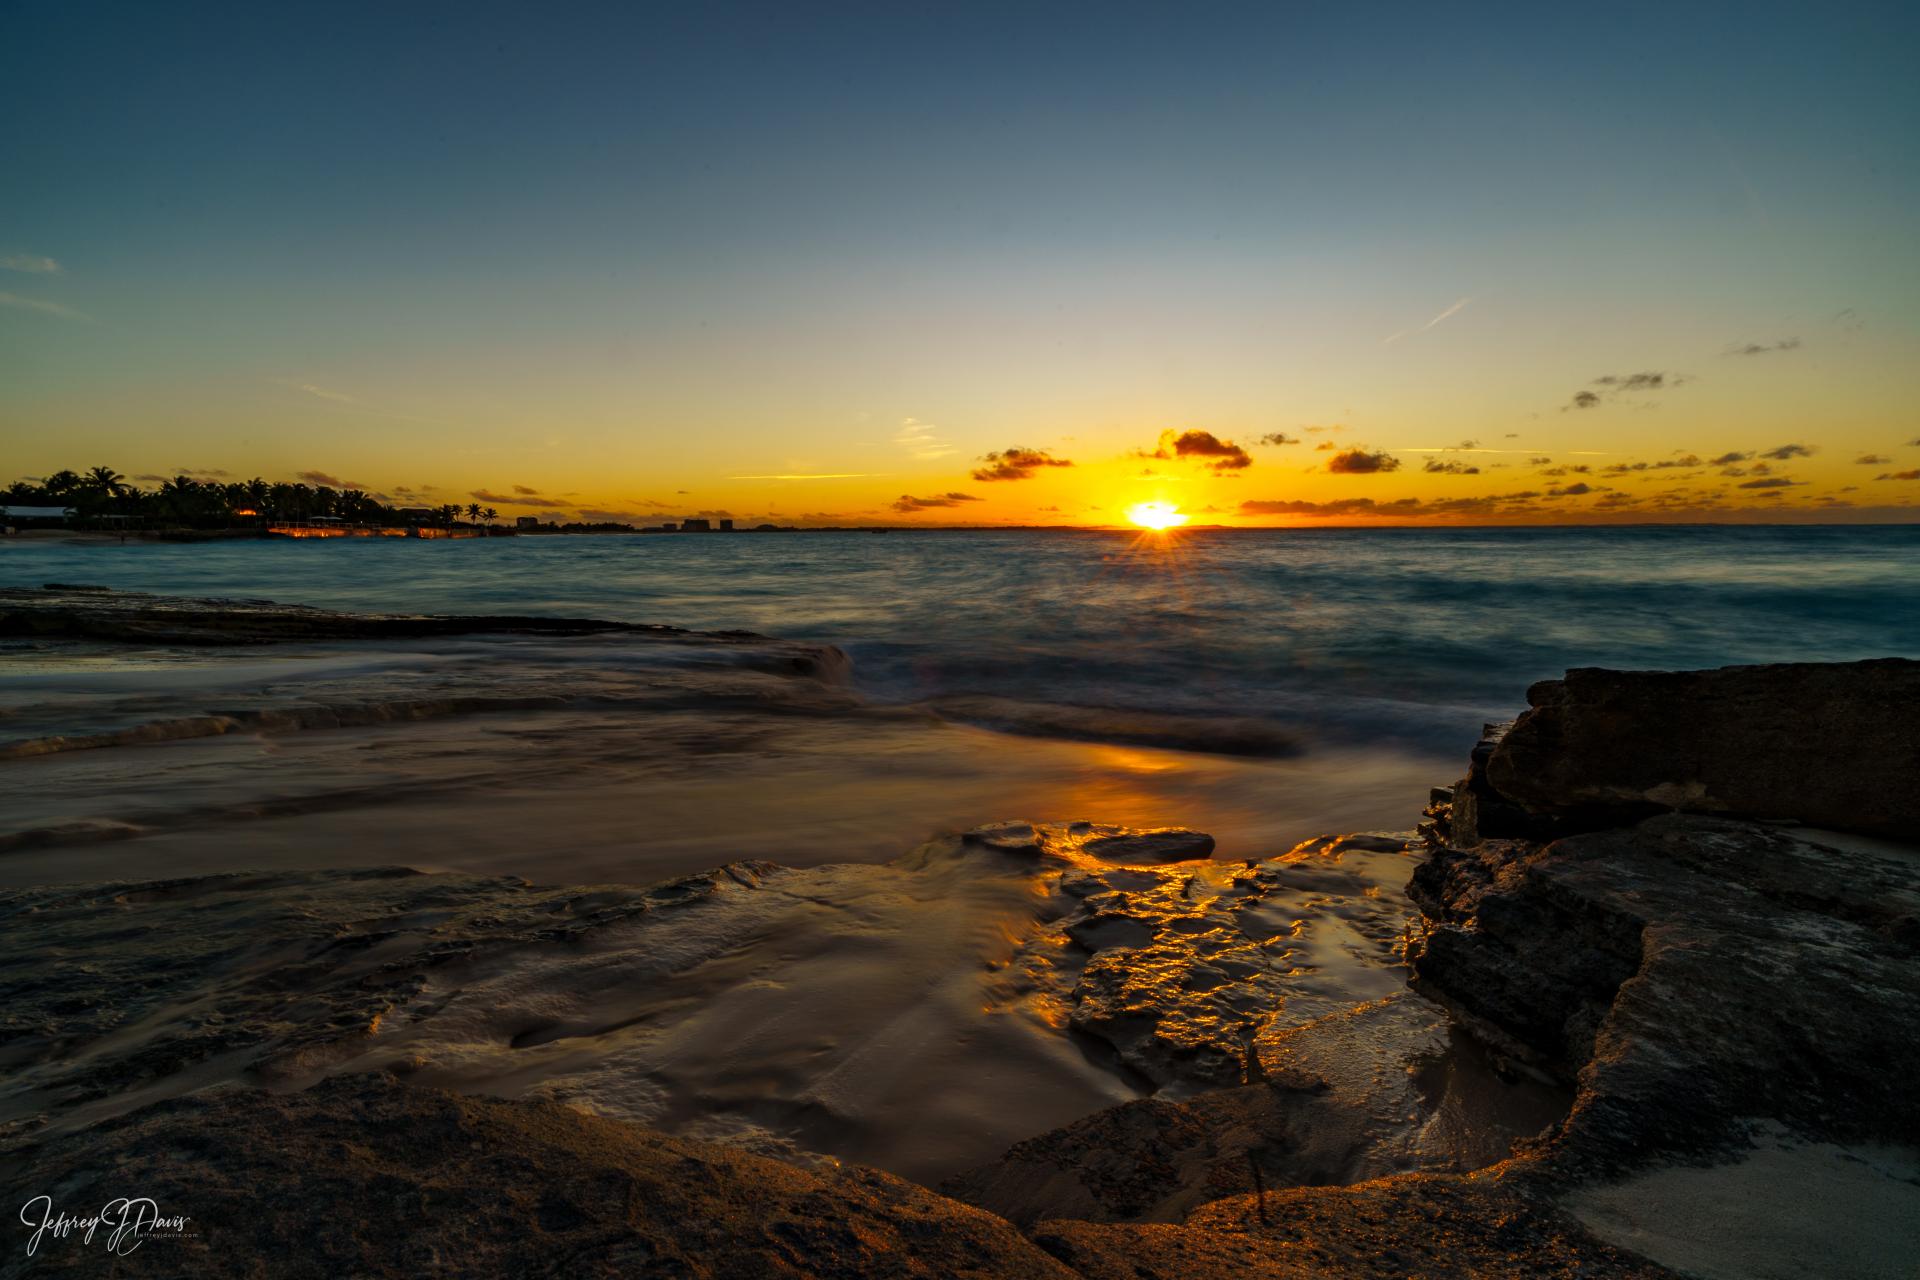 Pelican Beach #Sunset over Grace Bay, Providenciales, Turks & Caicos  Sony A7iii, 16mm, 2.5sec, f22, ISO50